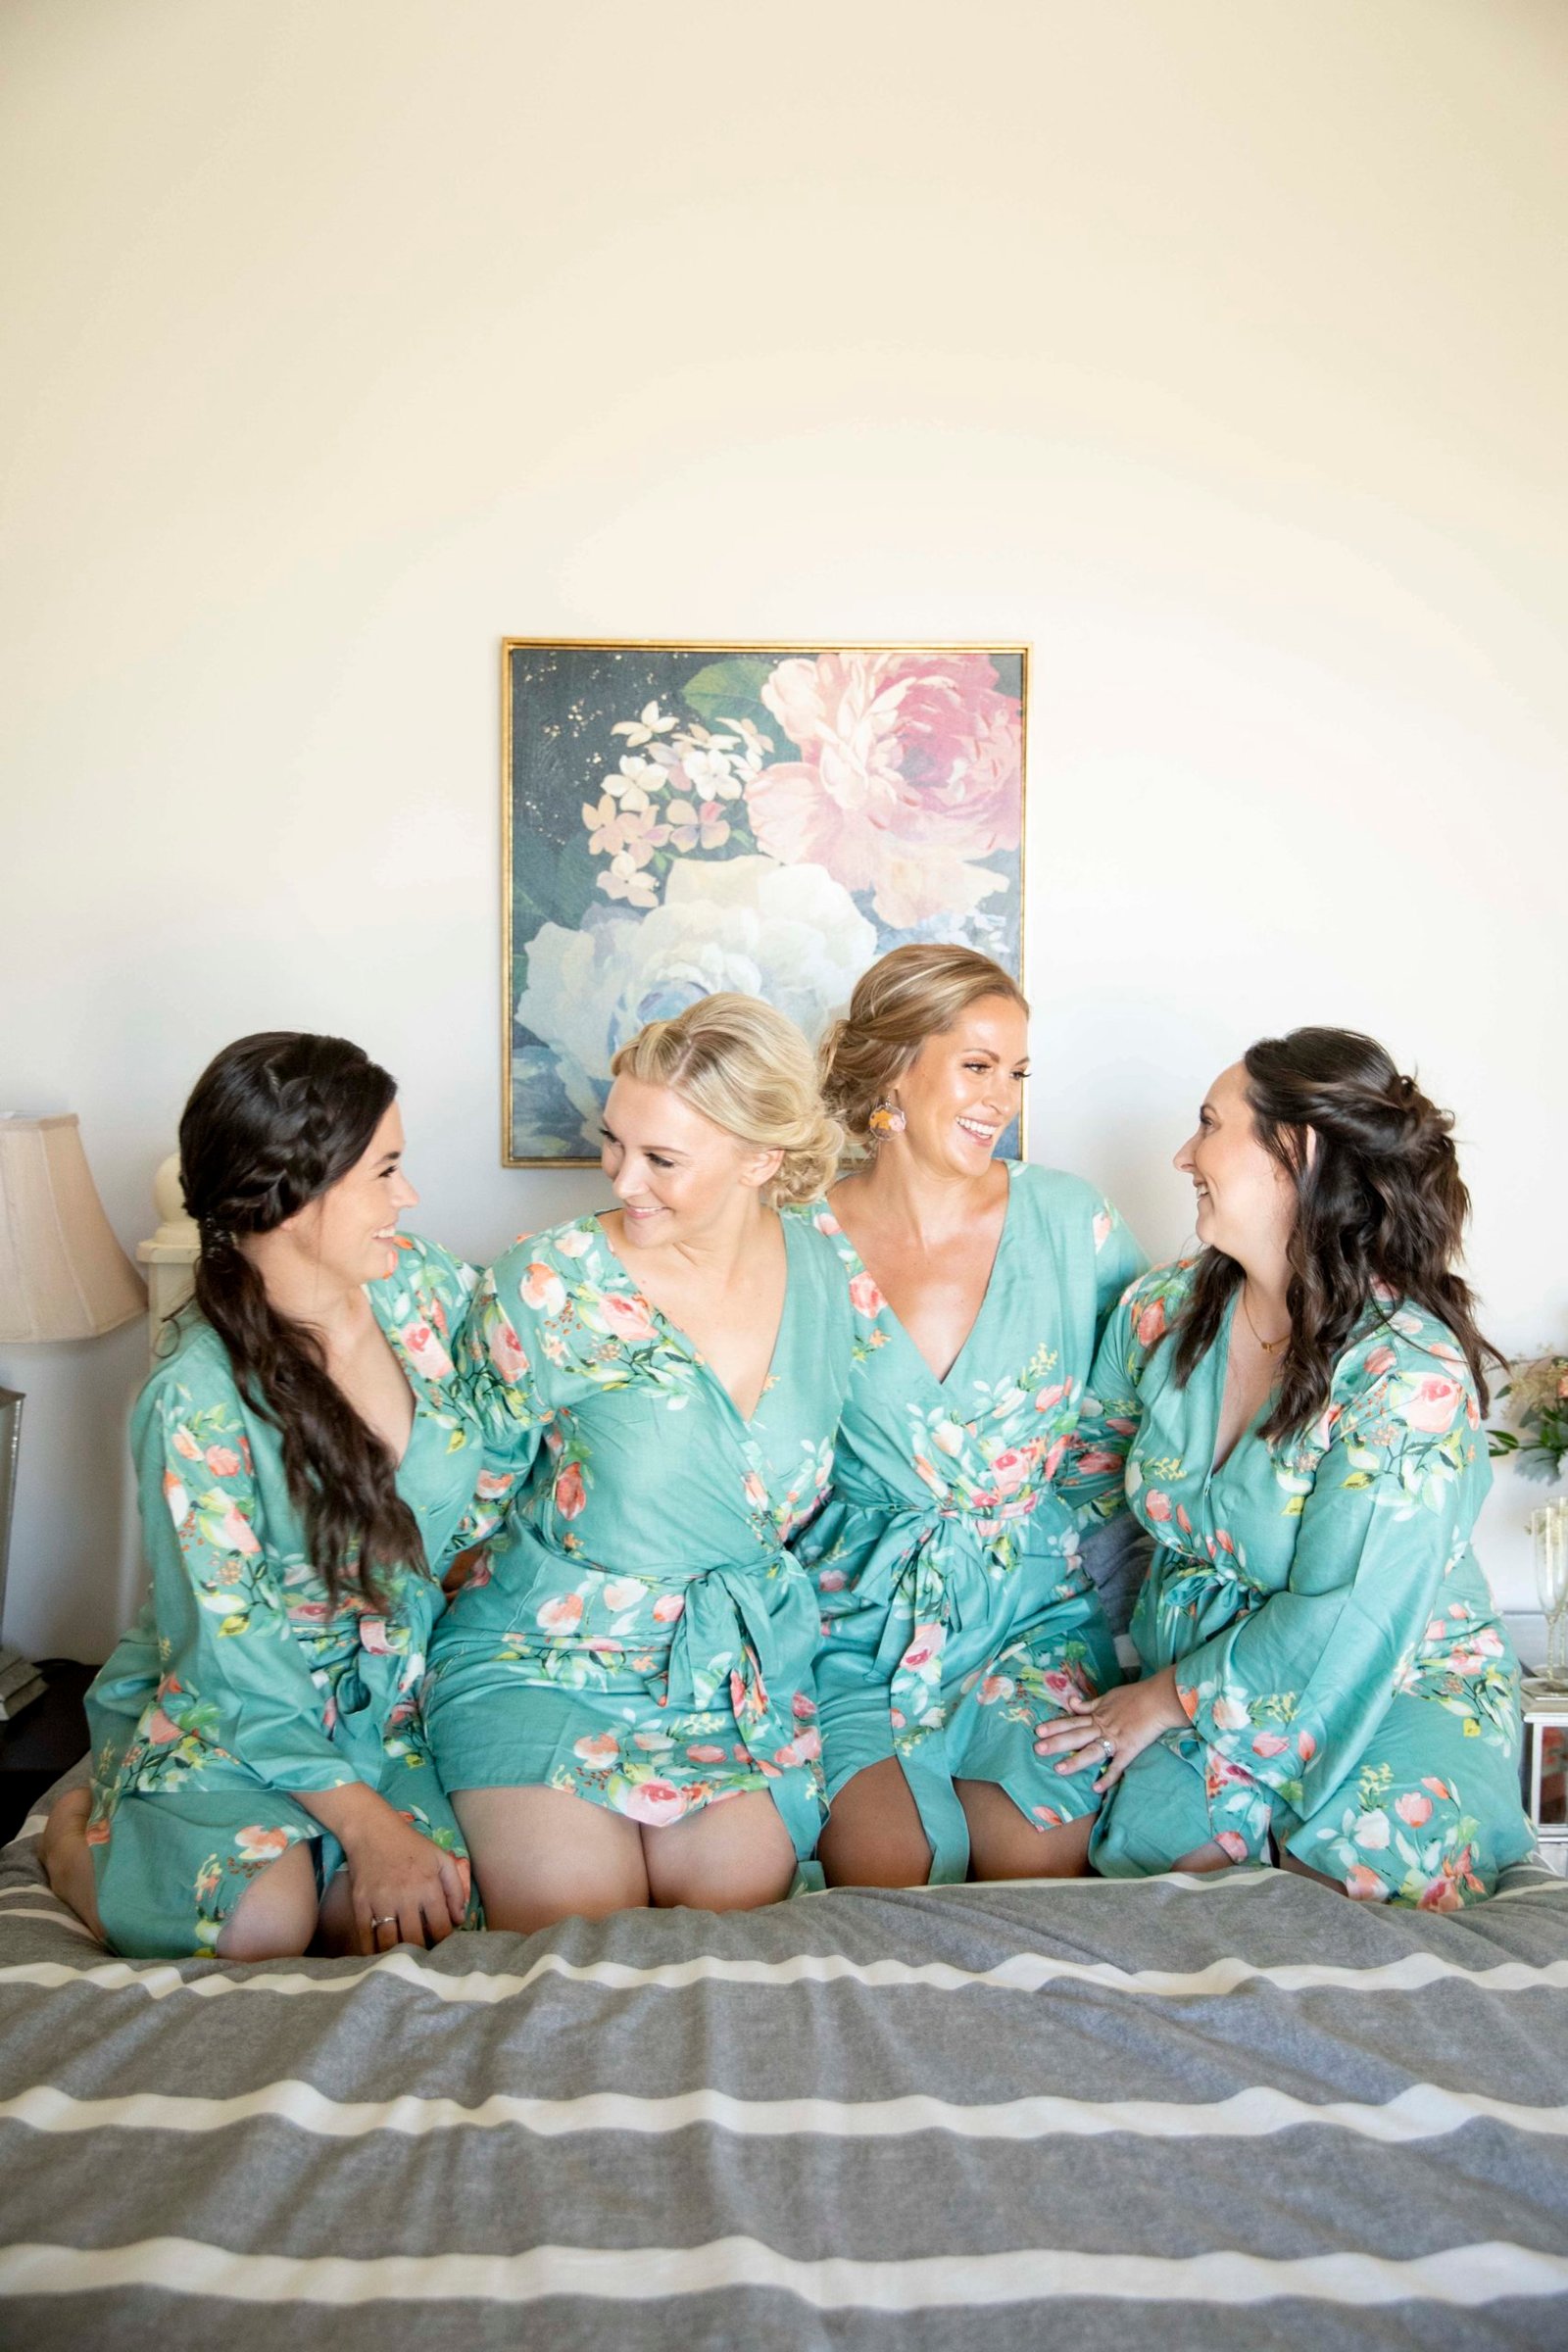 Bride and bridesmaids smiling while wearing matching robes on a bed